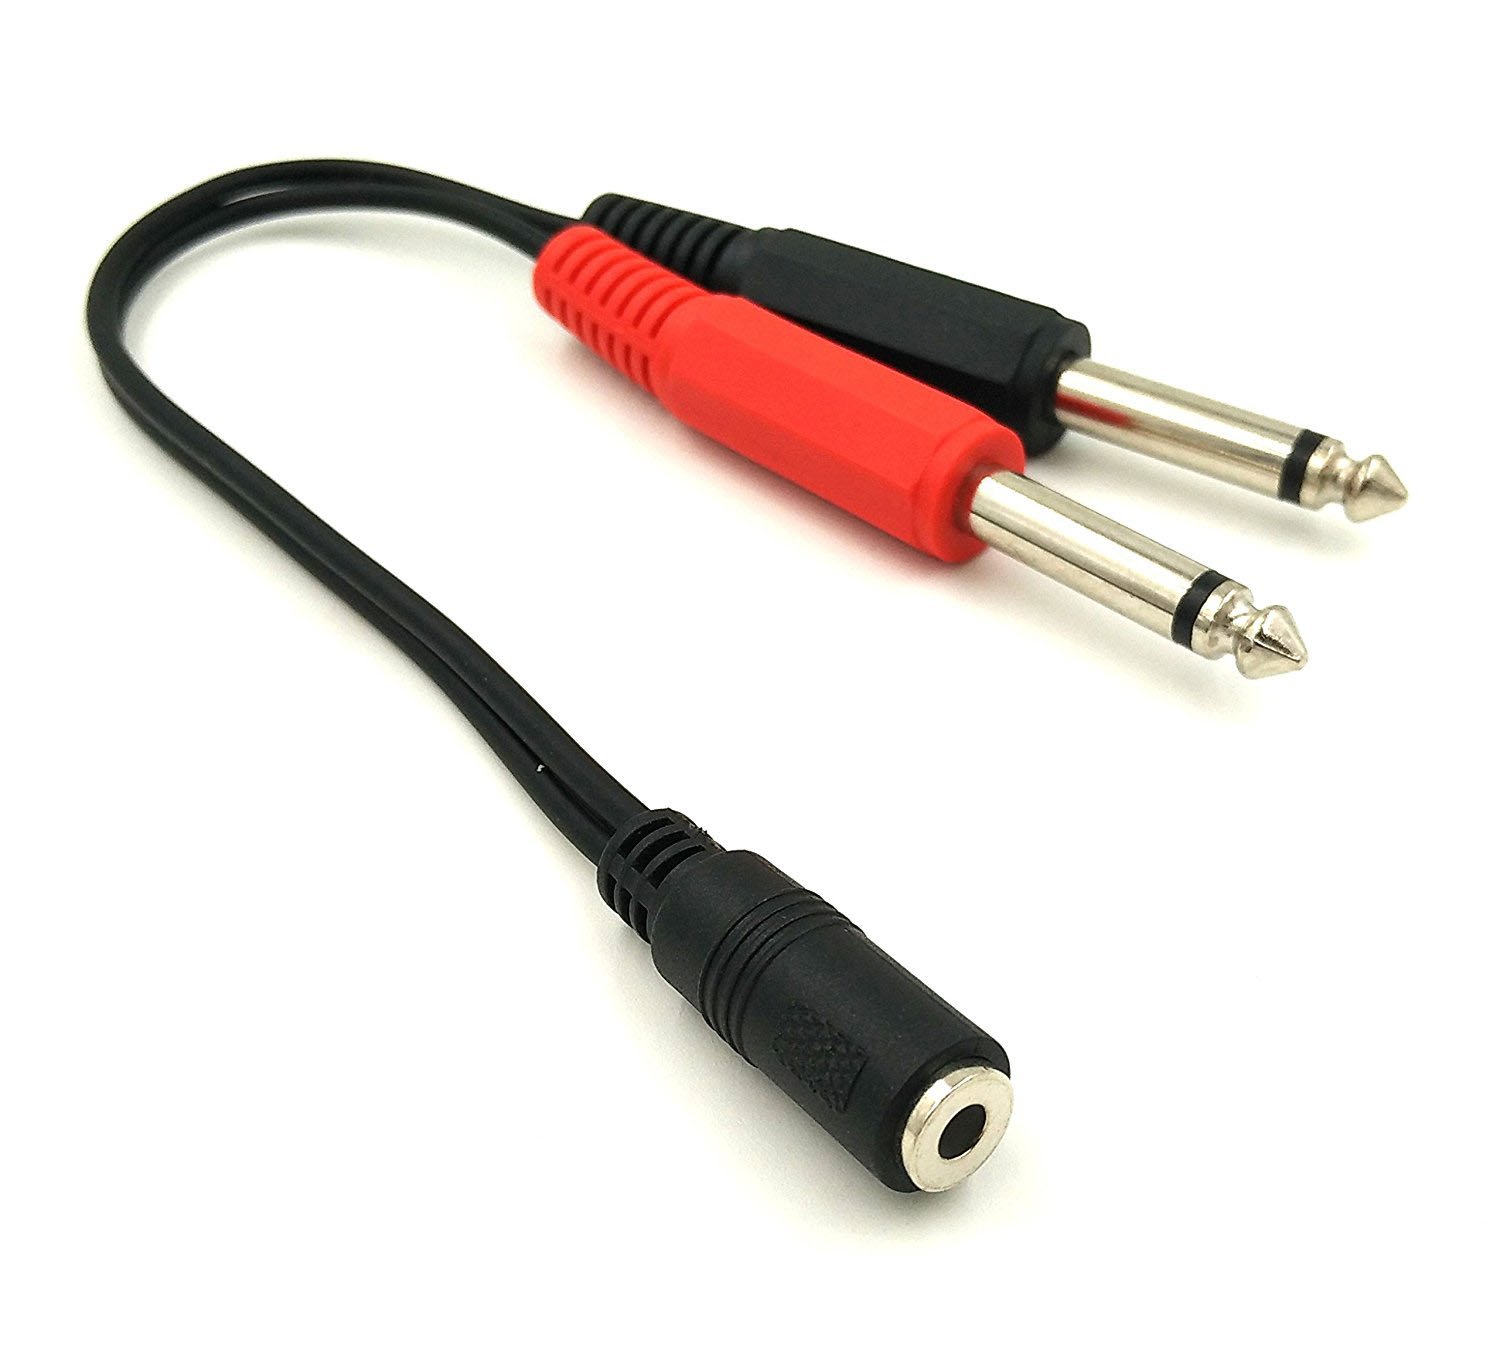 Book Cover Poyiccot 3.5mm to 1/4 Adapter Cable,1/4 Mono to 3.5mm Stereo Adapter, 1/8 to 1/4 Splitter Cable, 3.5mm 1/8 TRS Female to Dual 6.35mm 1/4 TS Male Stereo to Mono Y Splitter Cable, 20cm/8inch